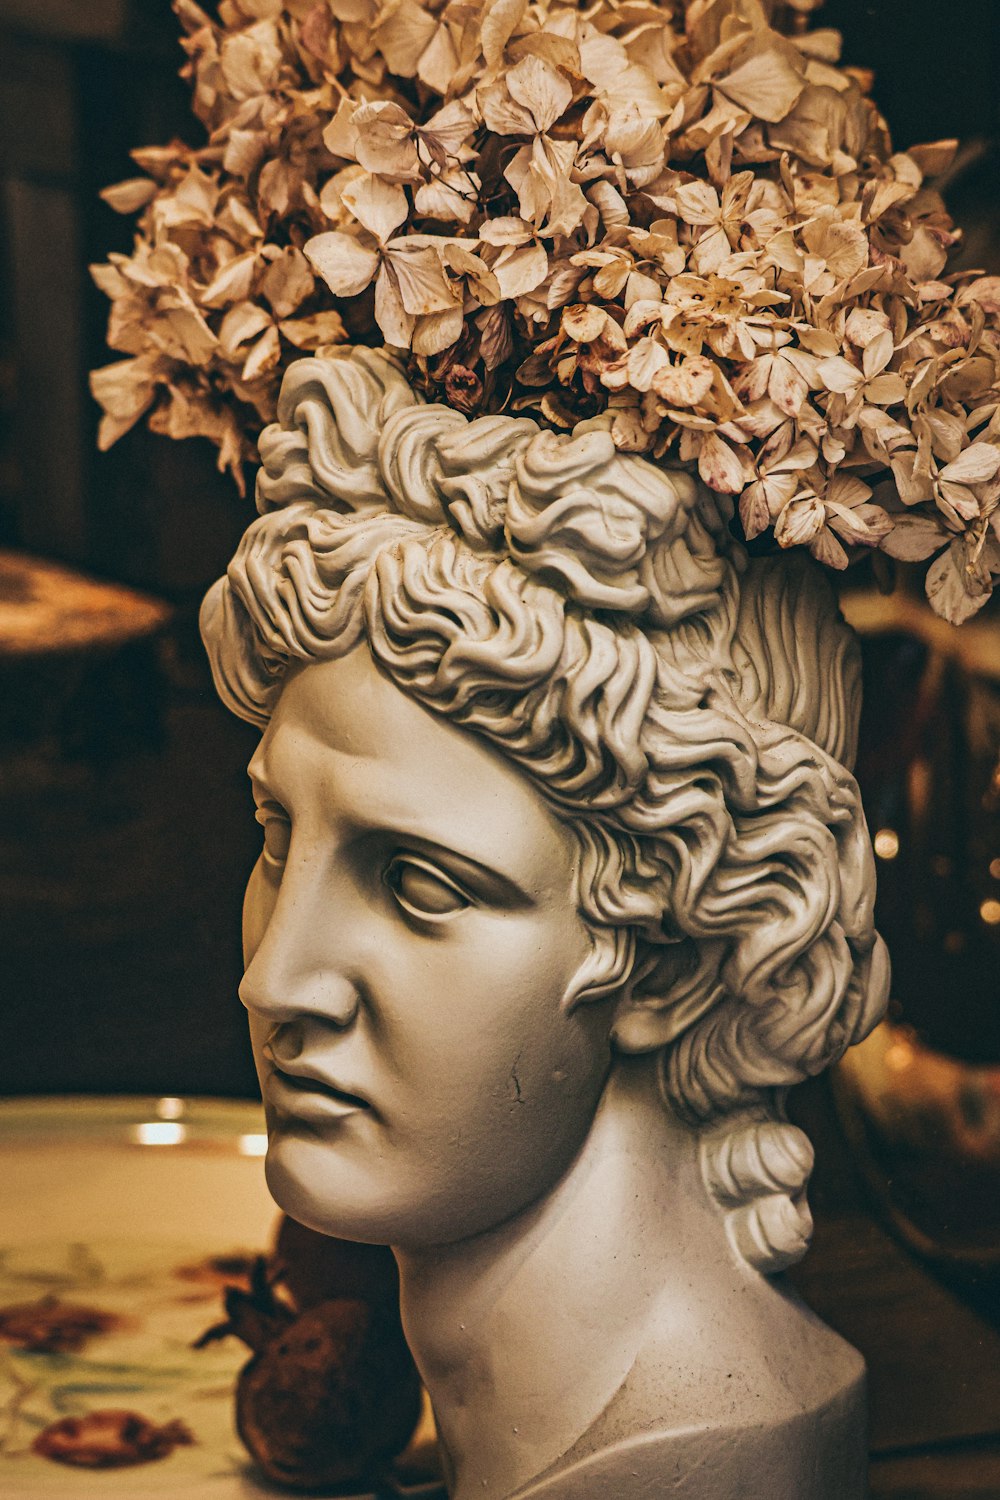 a statue of a person with flowers on the head